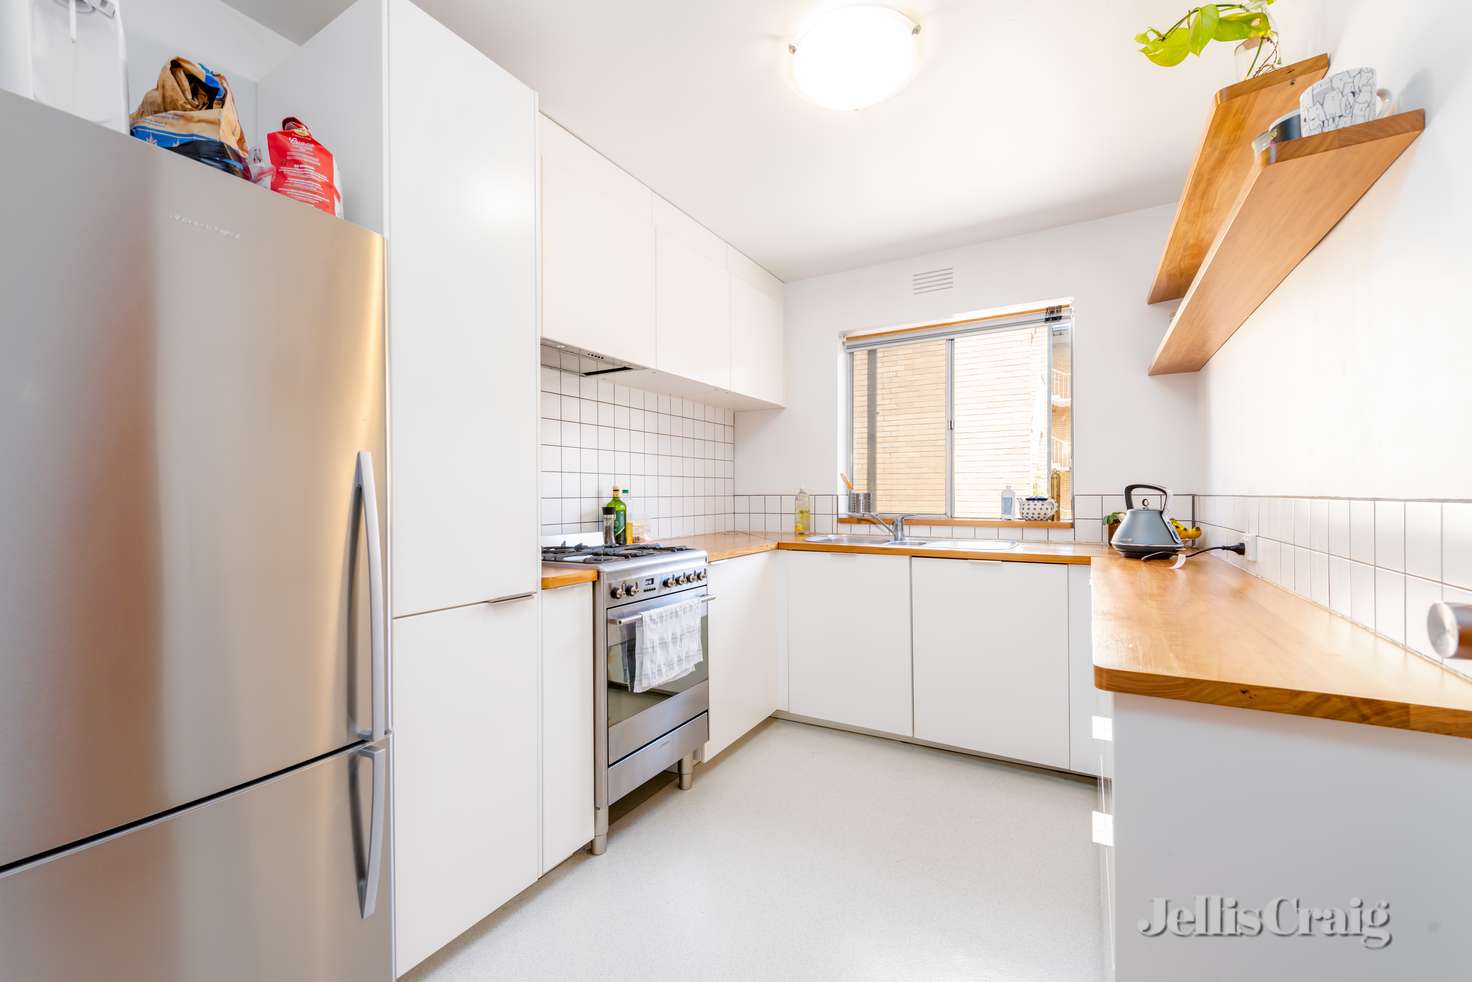 Main view of Homely apartment listing, 4/80 O'Shanassy Street, North Melbourne VIC 3051